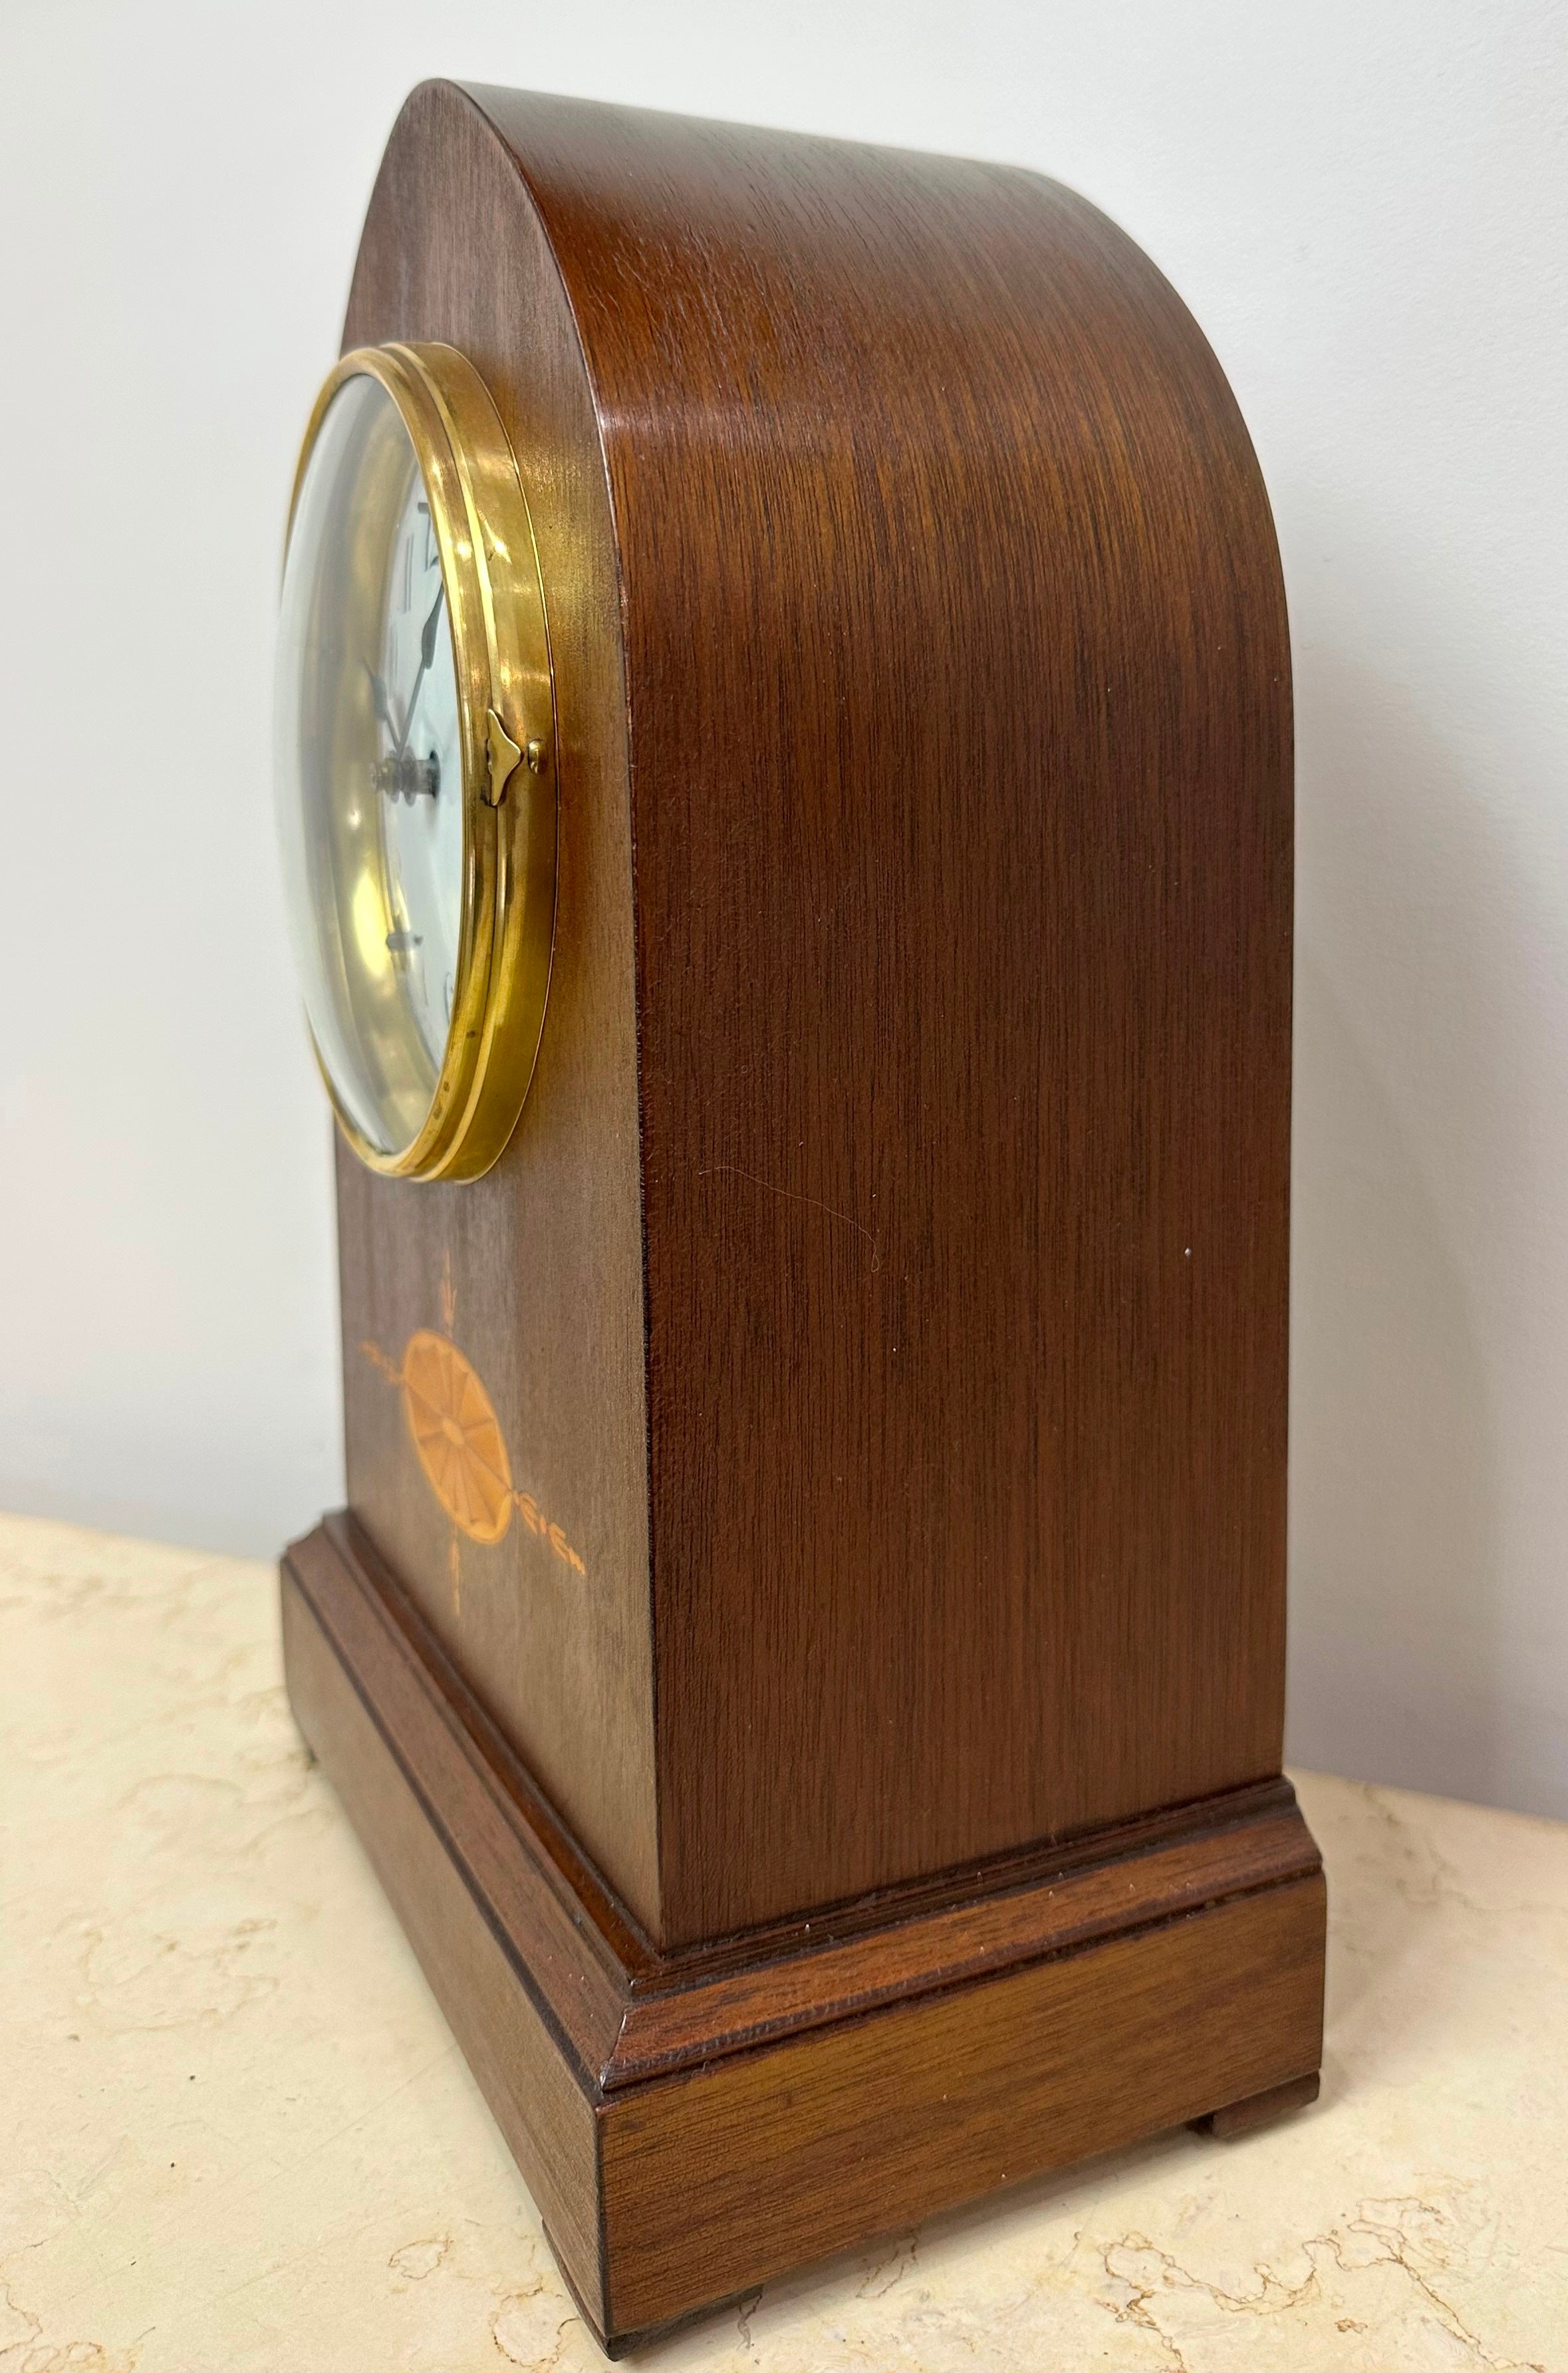 Antique Oak Sessions Hammer on Coil Chime Mantel Clock | eXibit collection